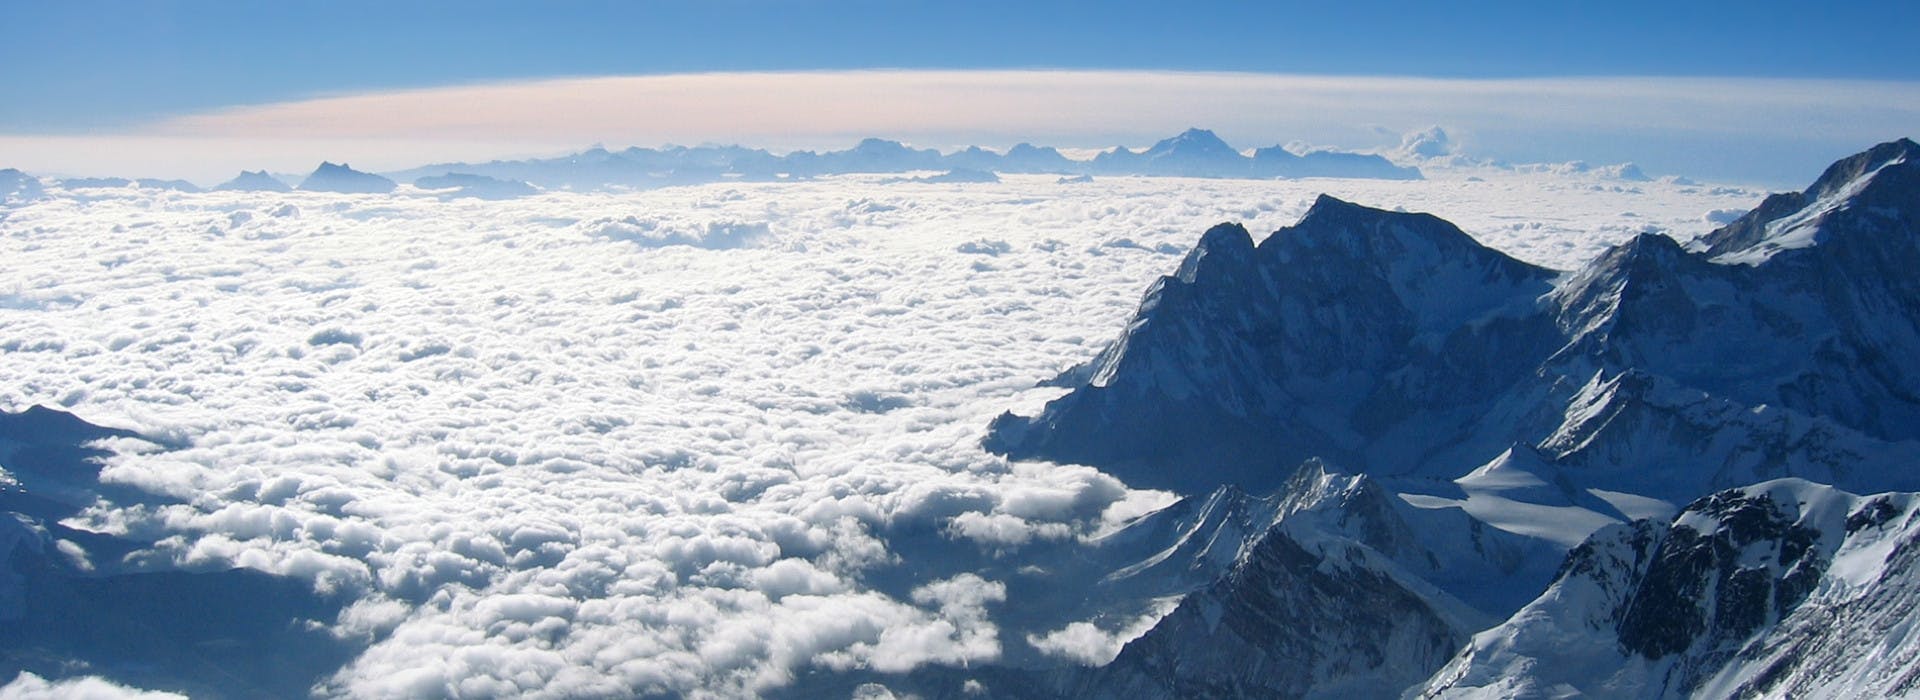 8 Tallest Mountains in Nepal